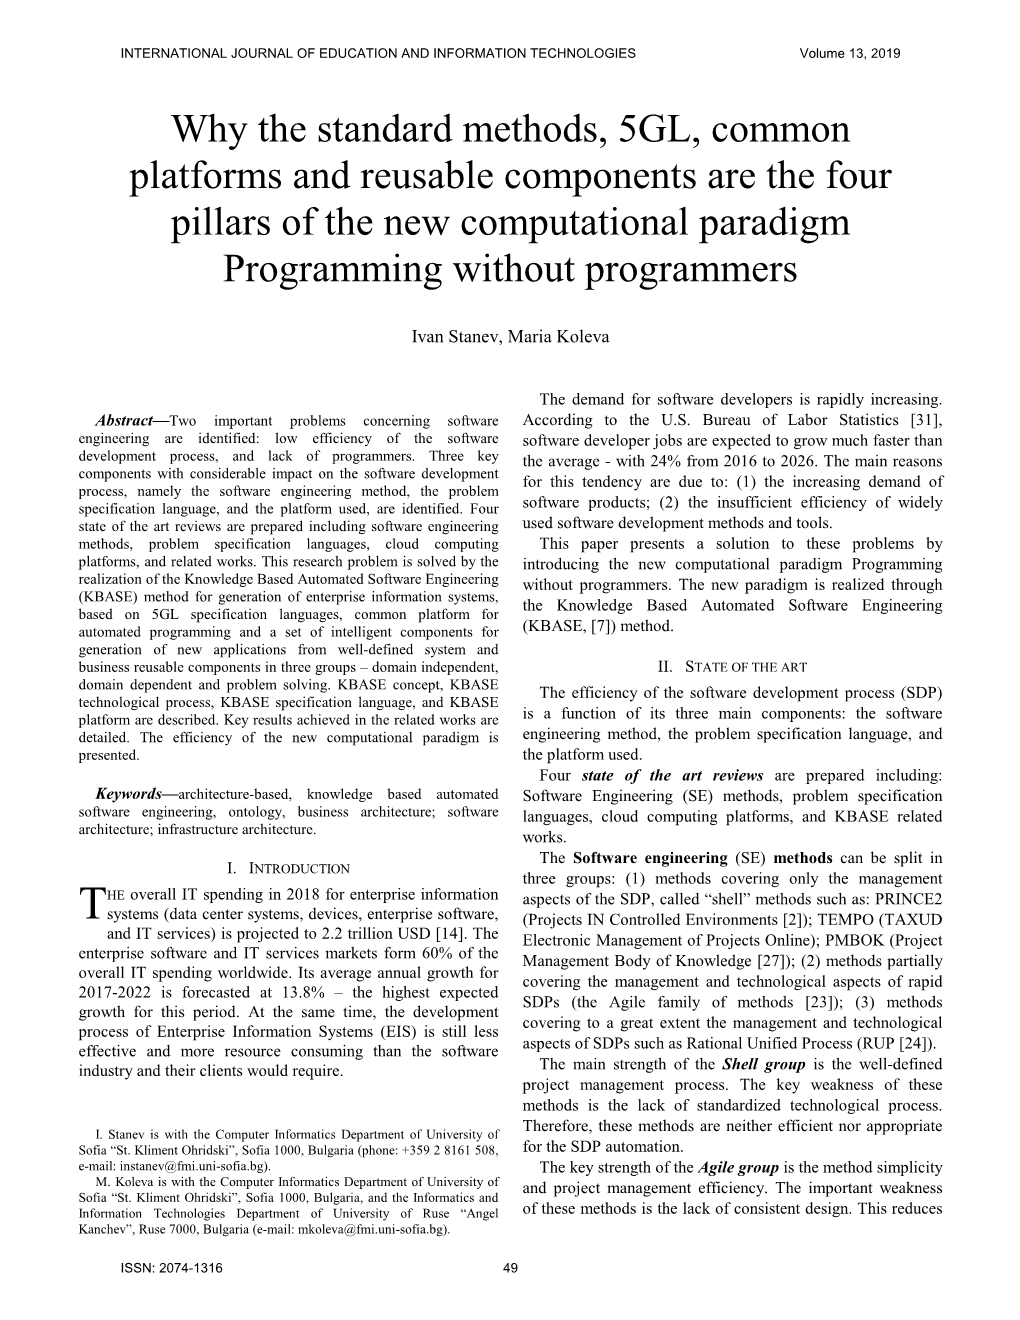 Why the Standard Methods, 5GL, Common Platforms and Reusable Components Are the Four Pillars of the New Computational Paradigm Programming Without Programmers